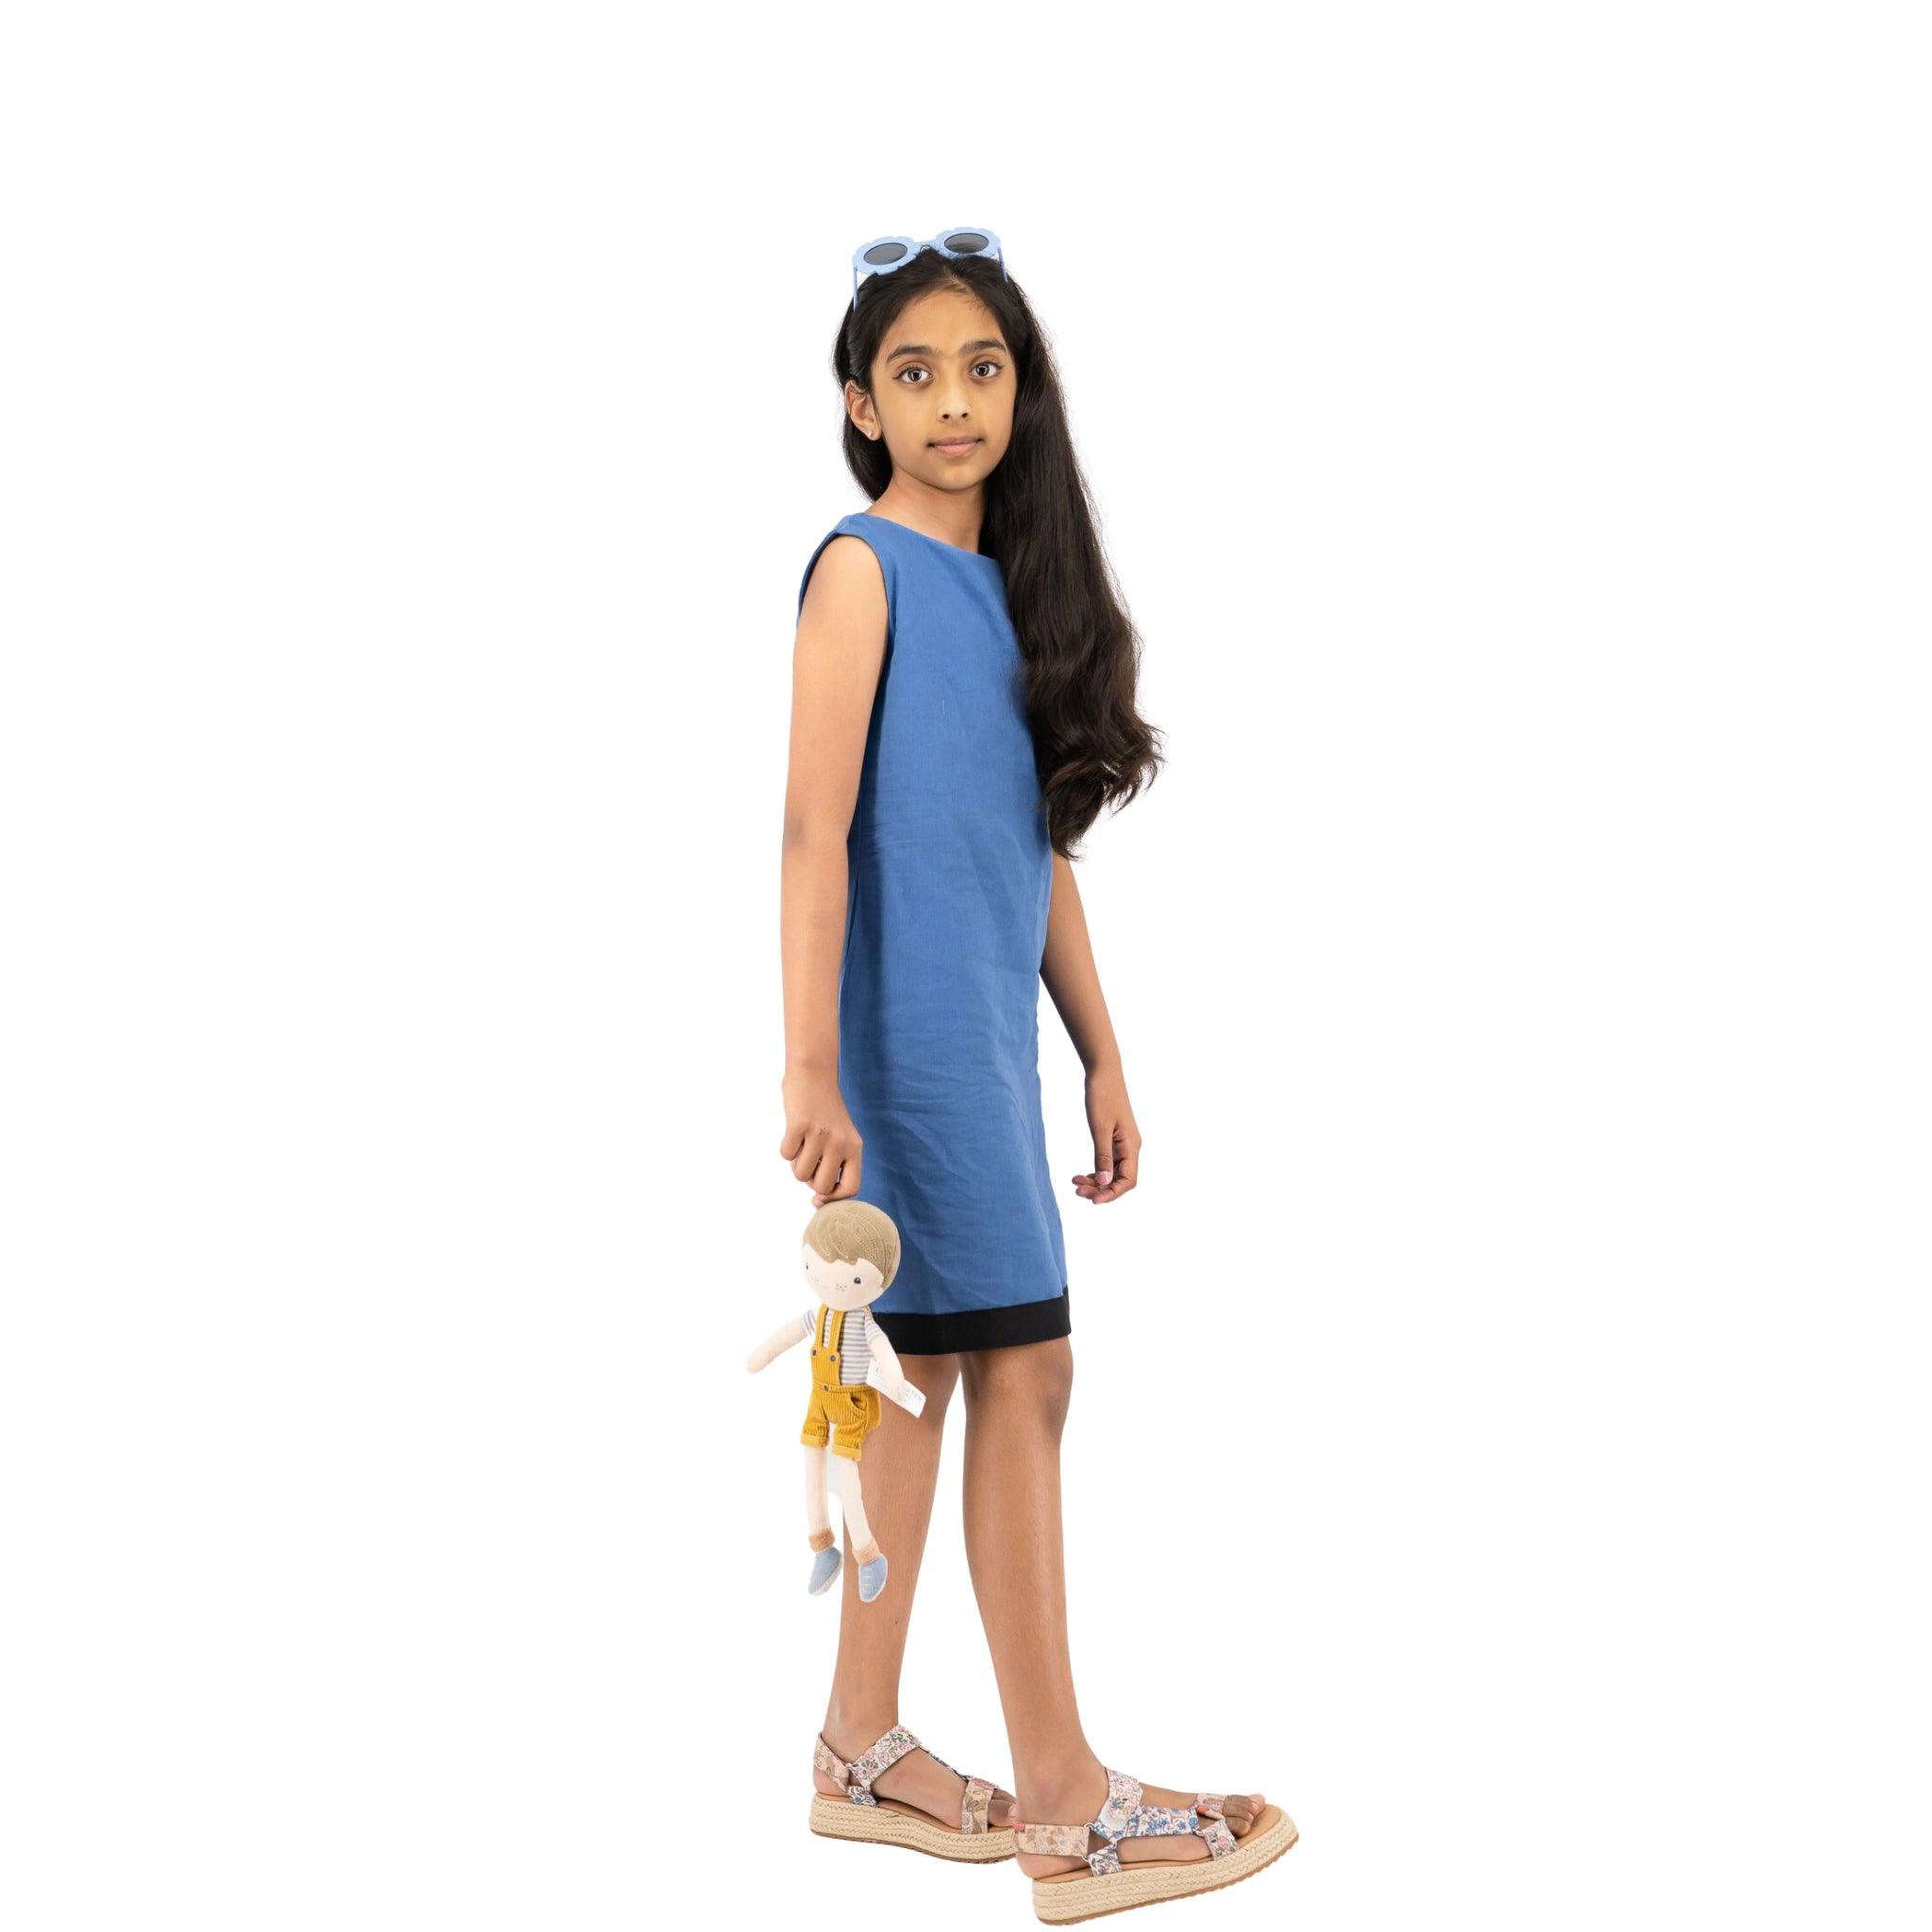 A young girl in a Karee Linen Cotton Round Neck Frock for Kids and sandals, holding a doll, stands looking to the side against a white background.